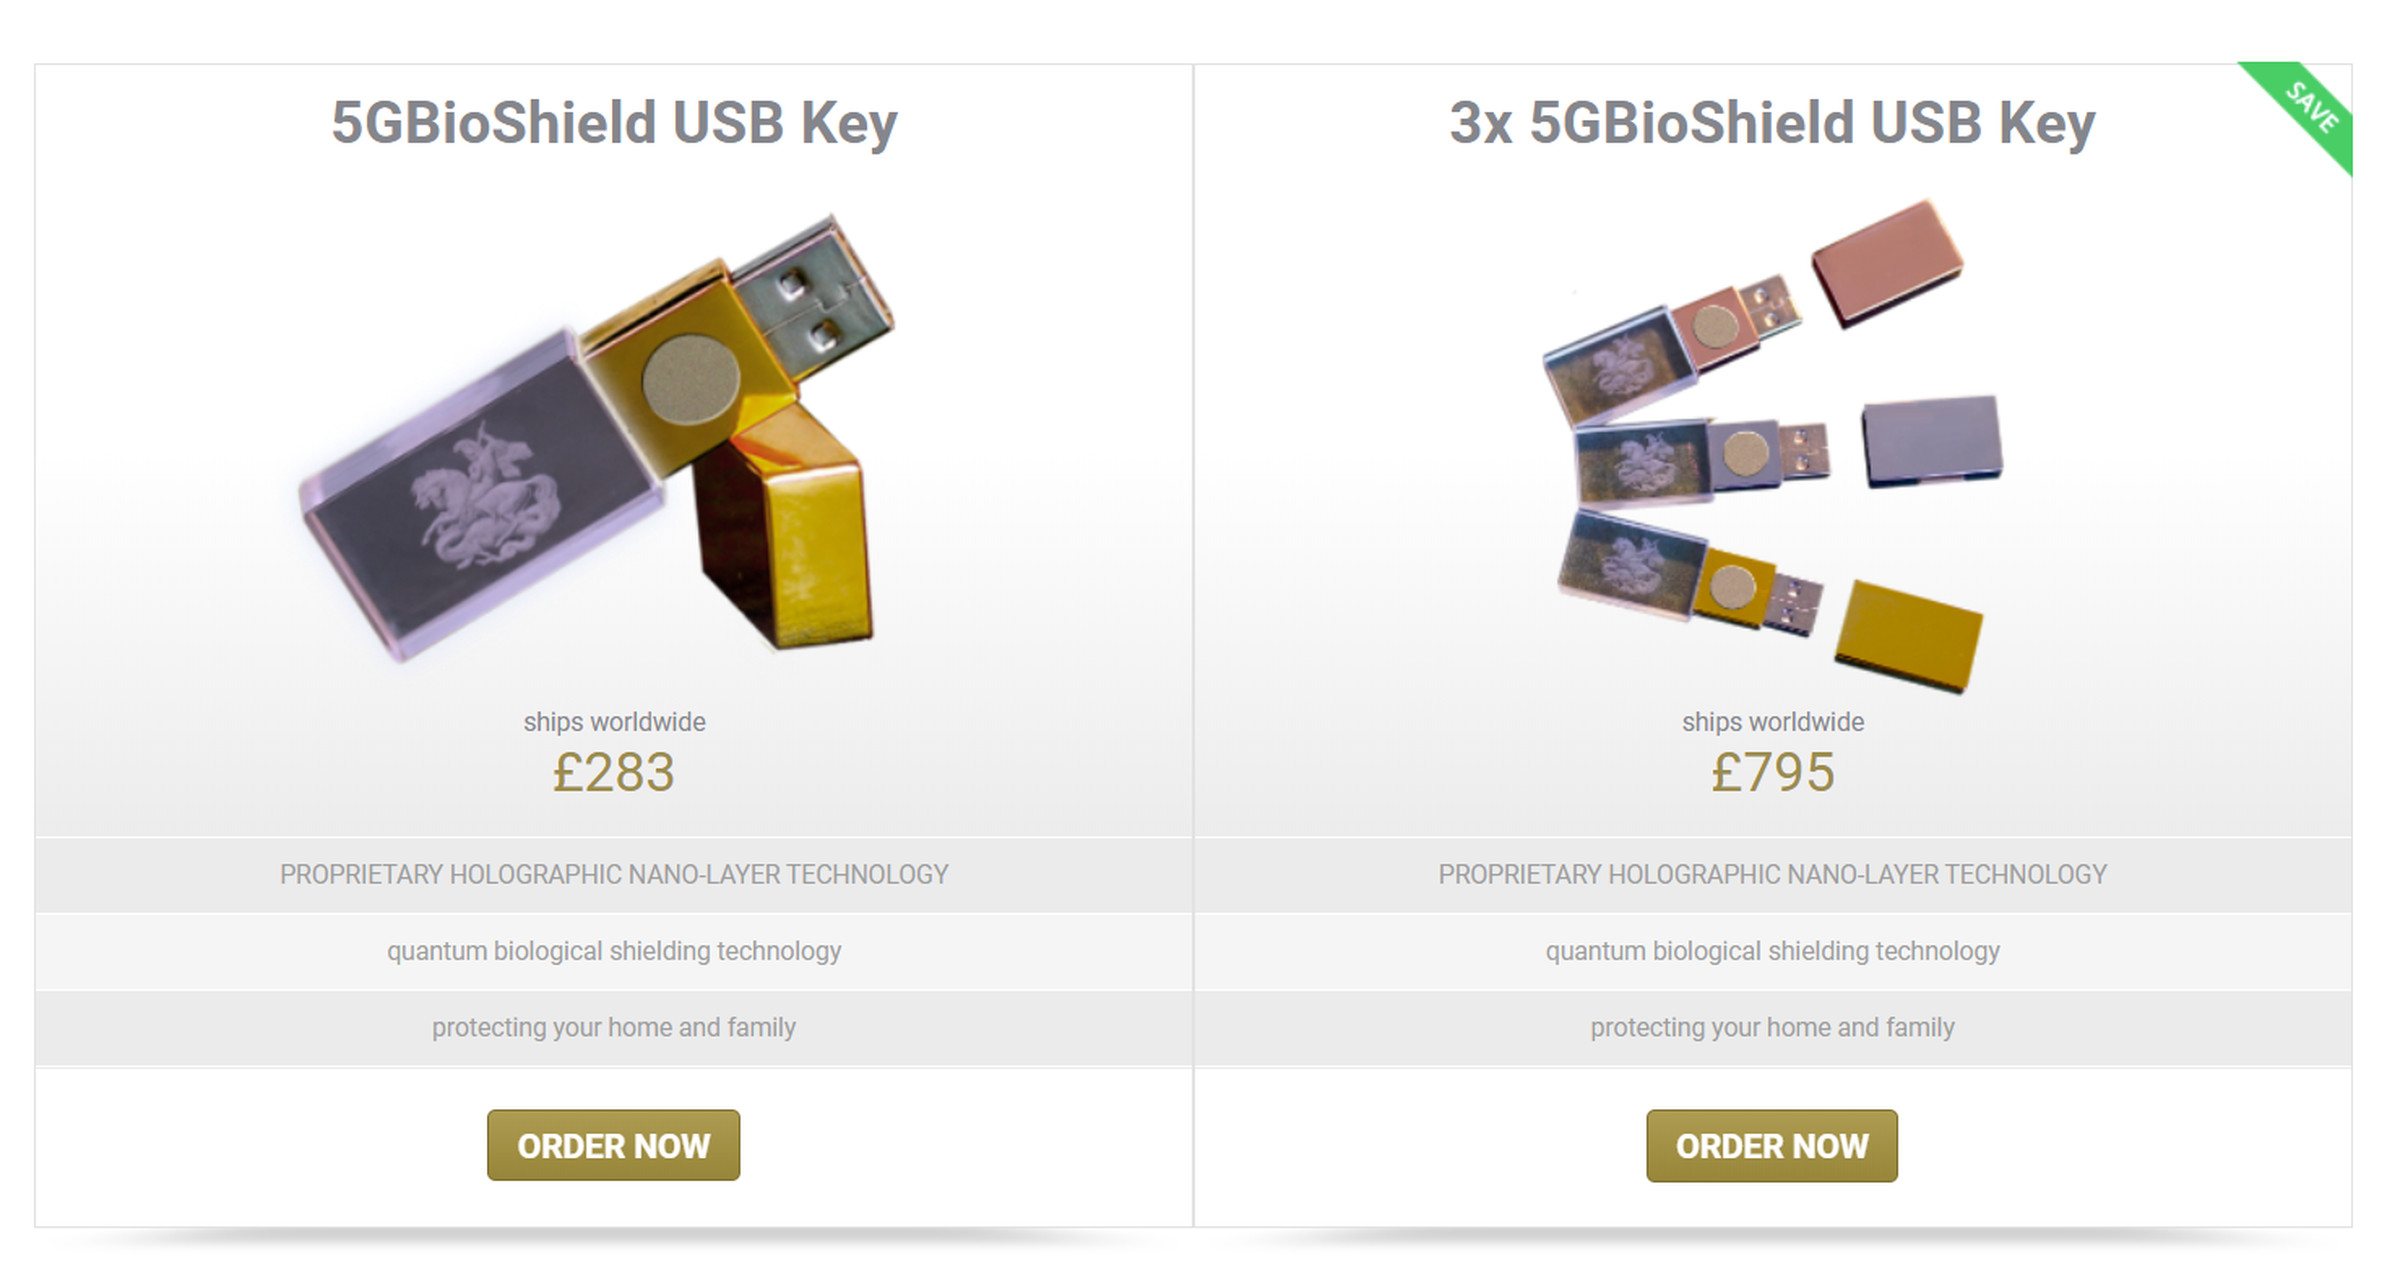 The fake anti-5G USB sticks on sale in the UK.